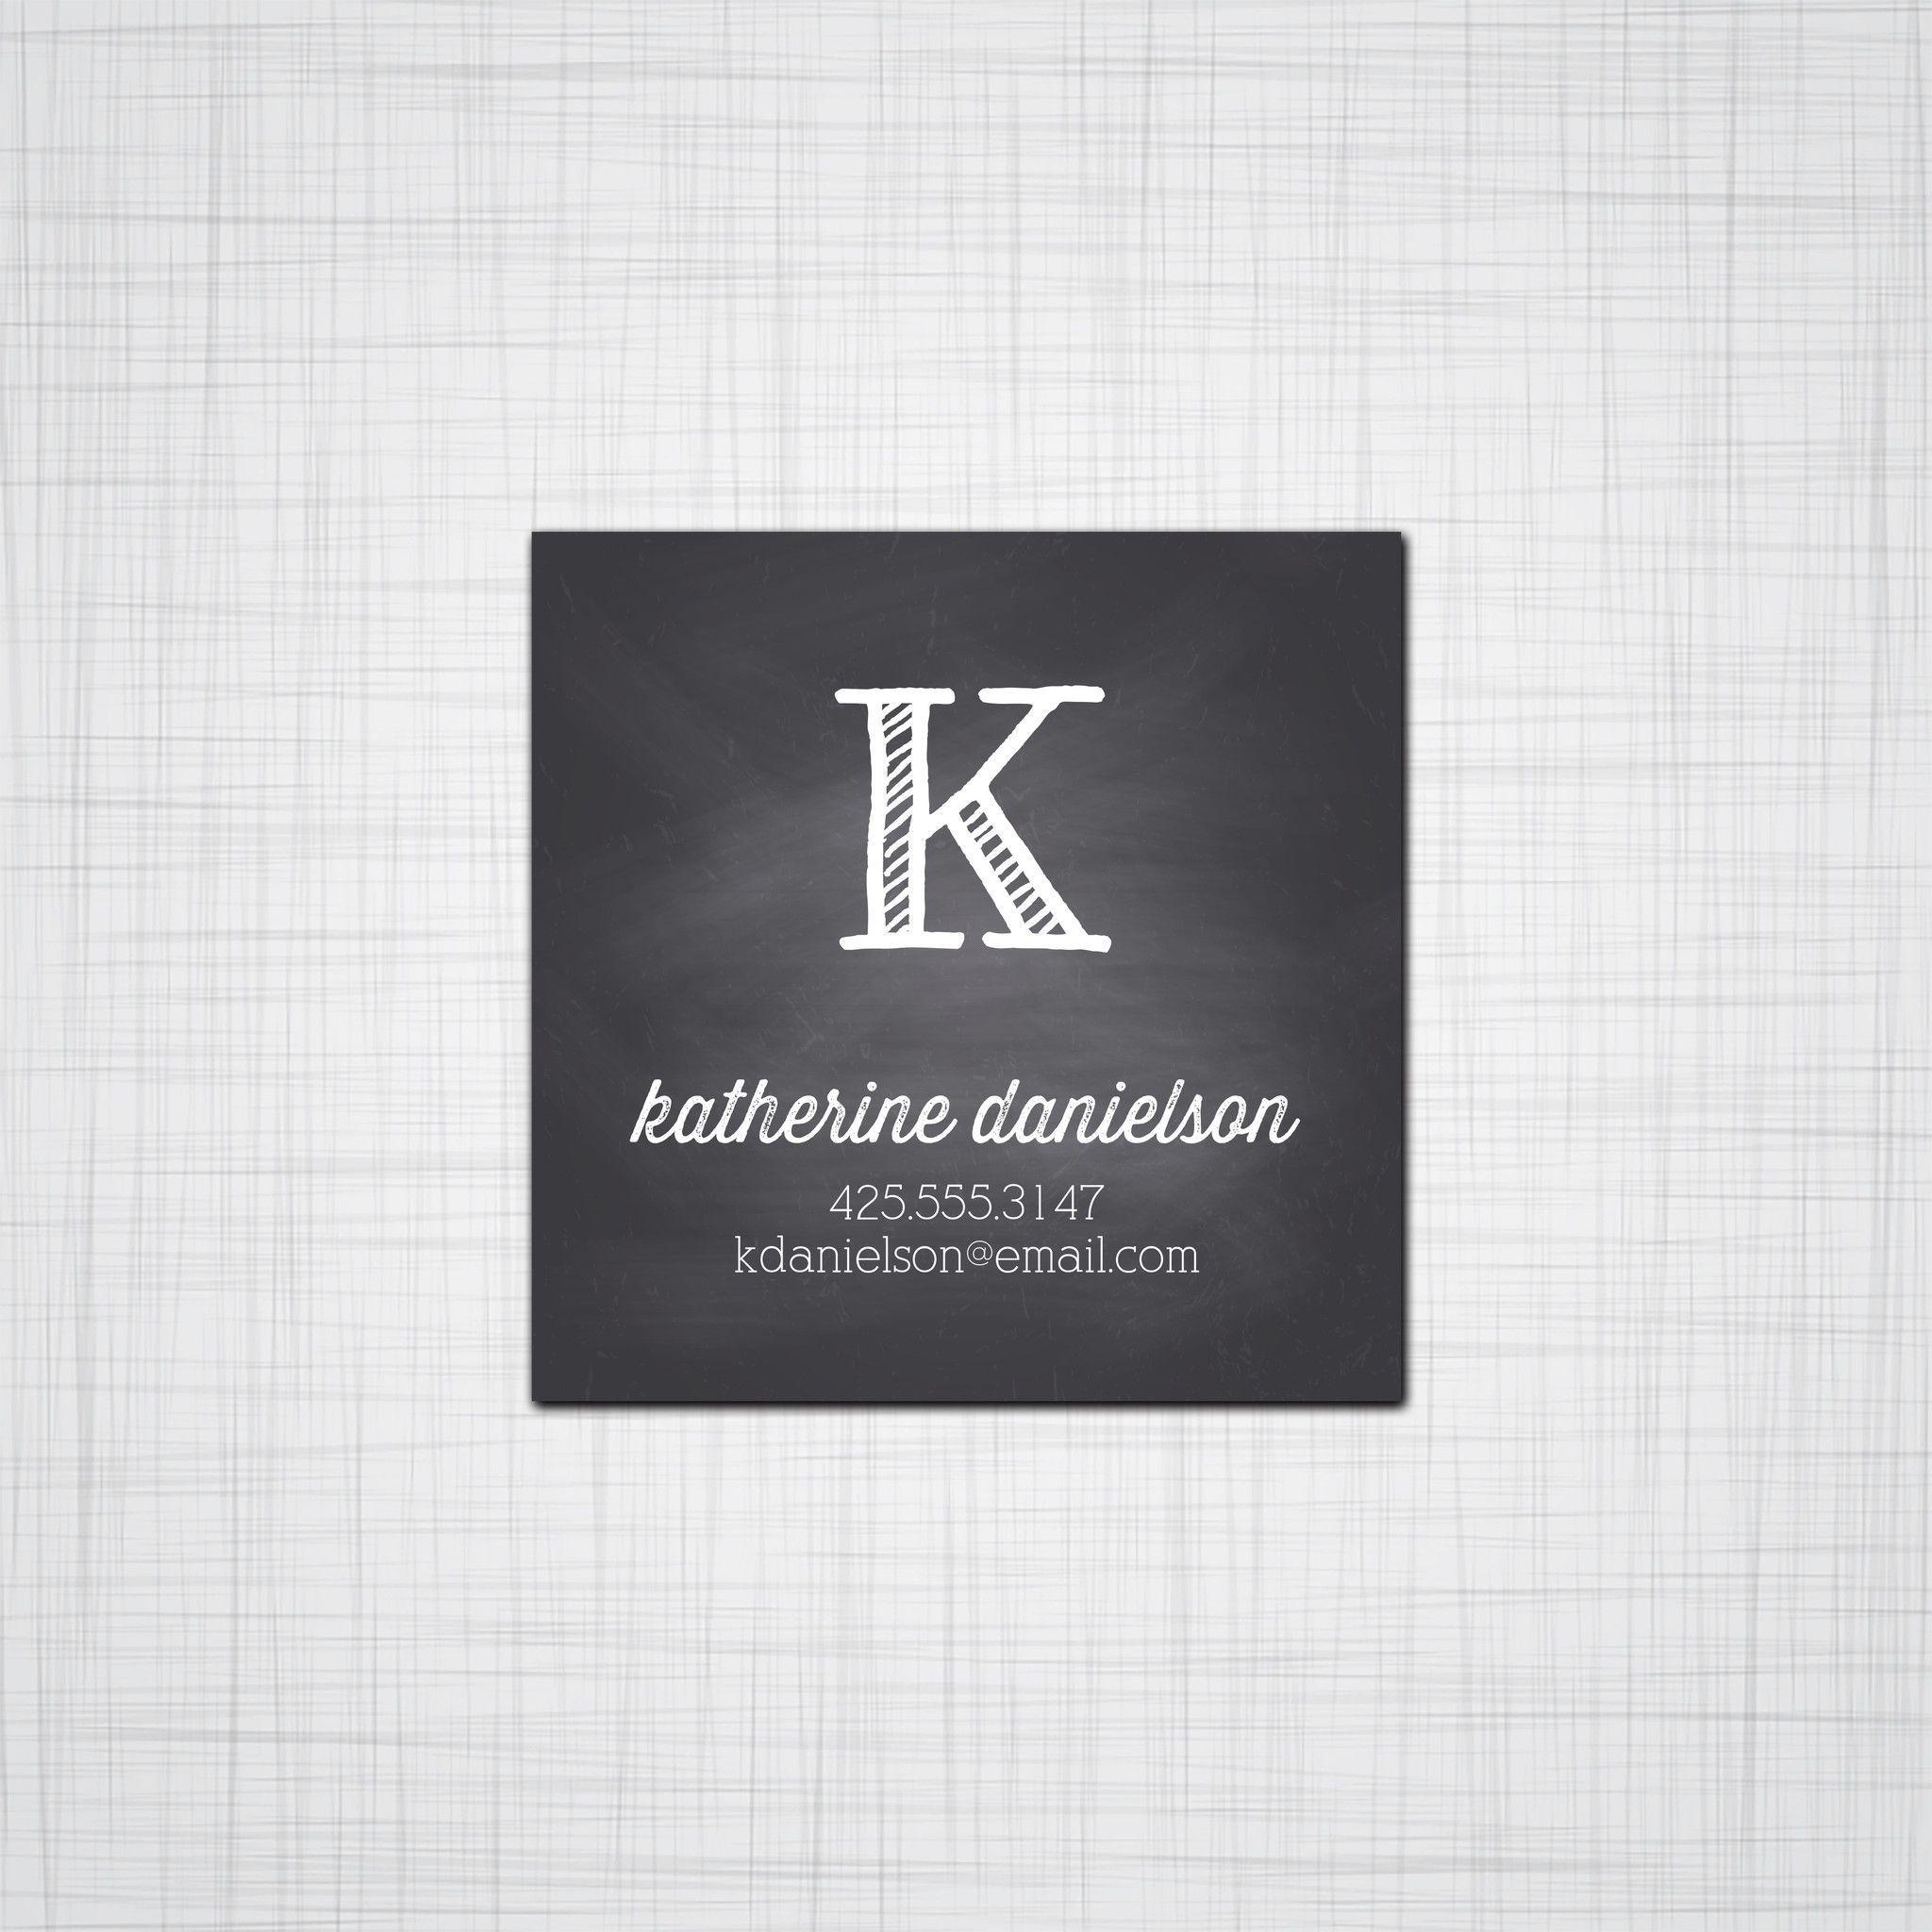 Fun Chalkboard Background Square Calling Card or Business Card